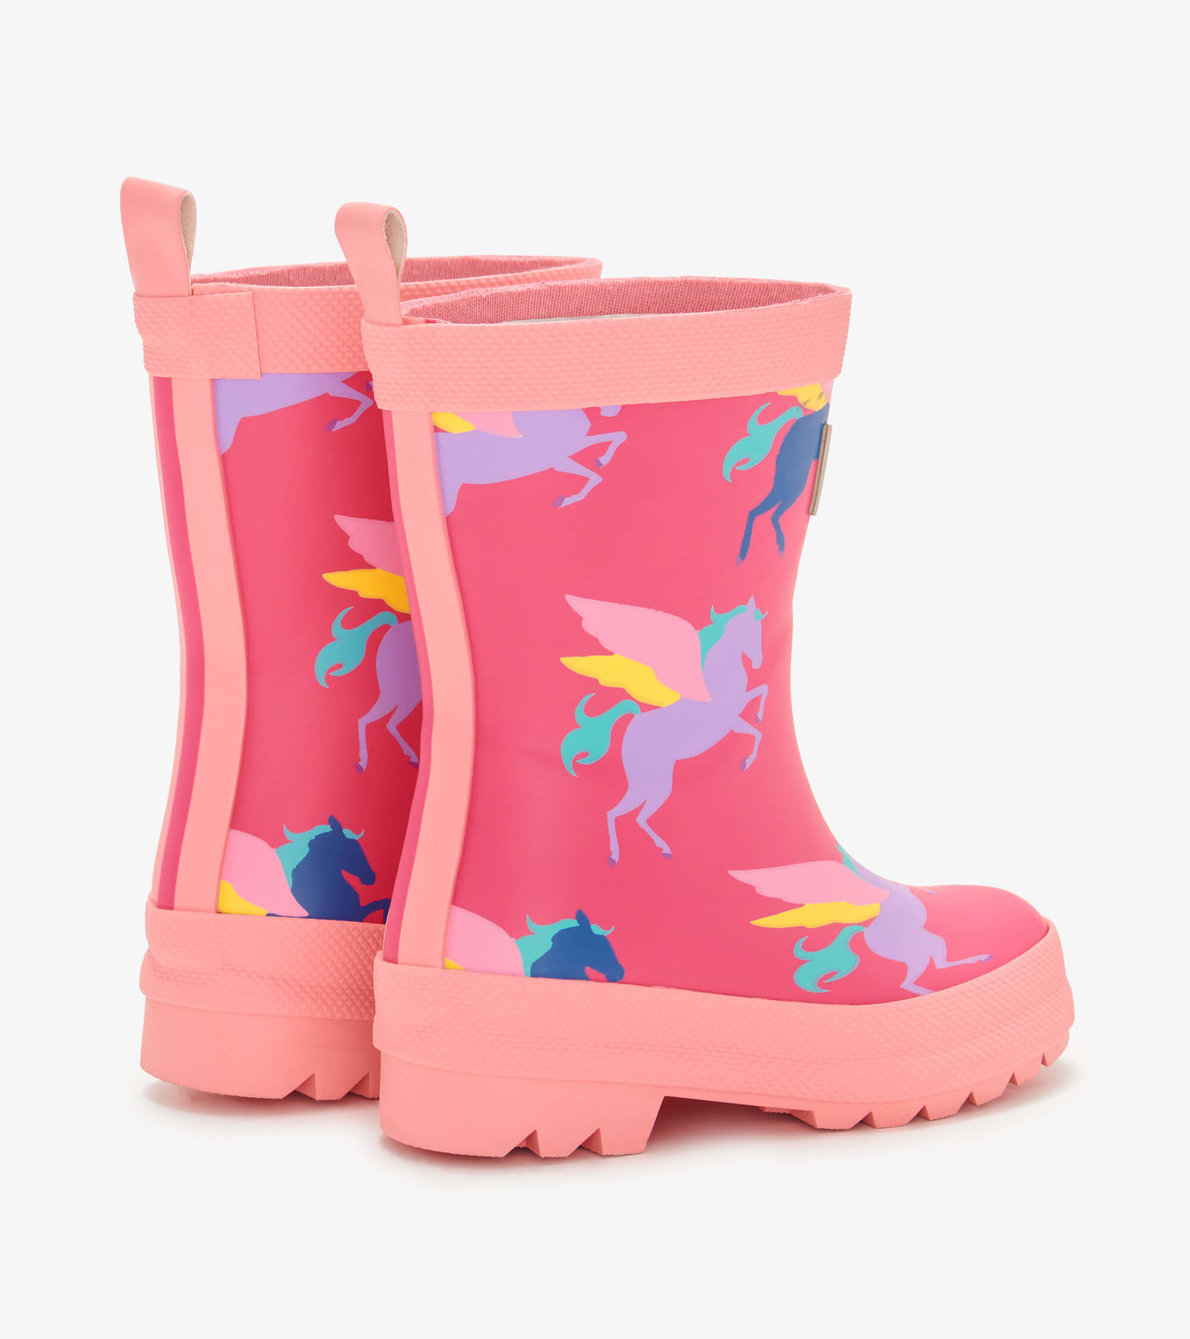 View larger image of My 1st Rain Boots - Graphic Pegasus